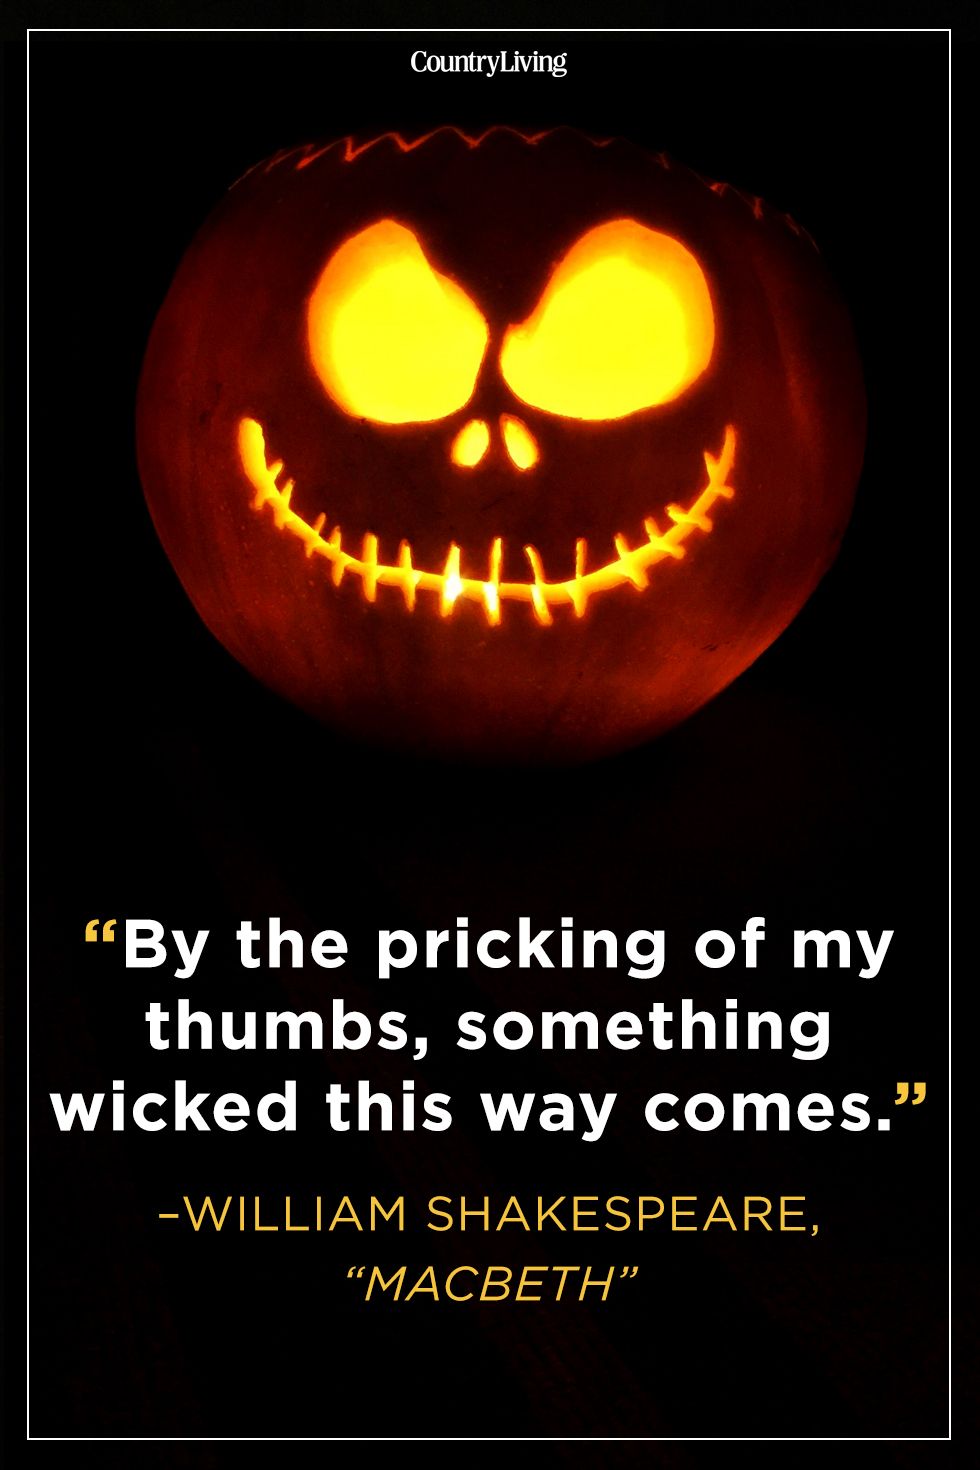 Scary Quotes Quotes & Sayings About Fear & Eerie Things